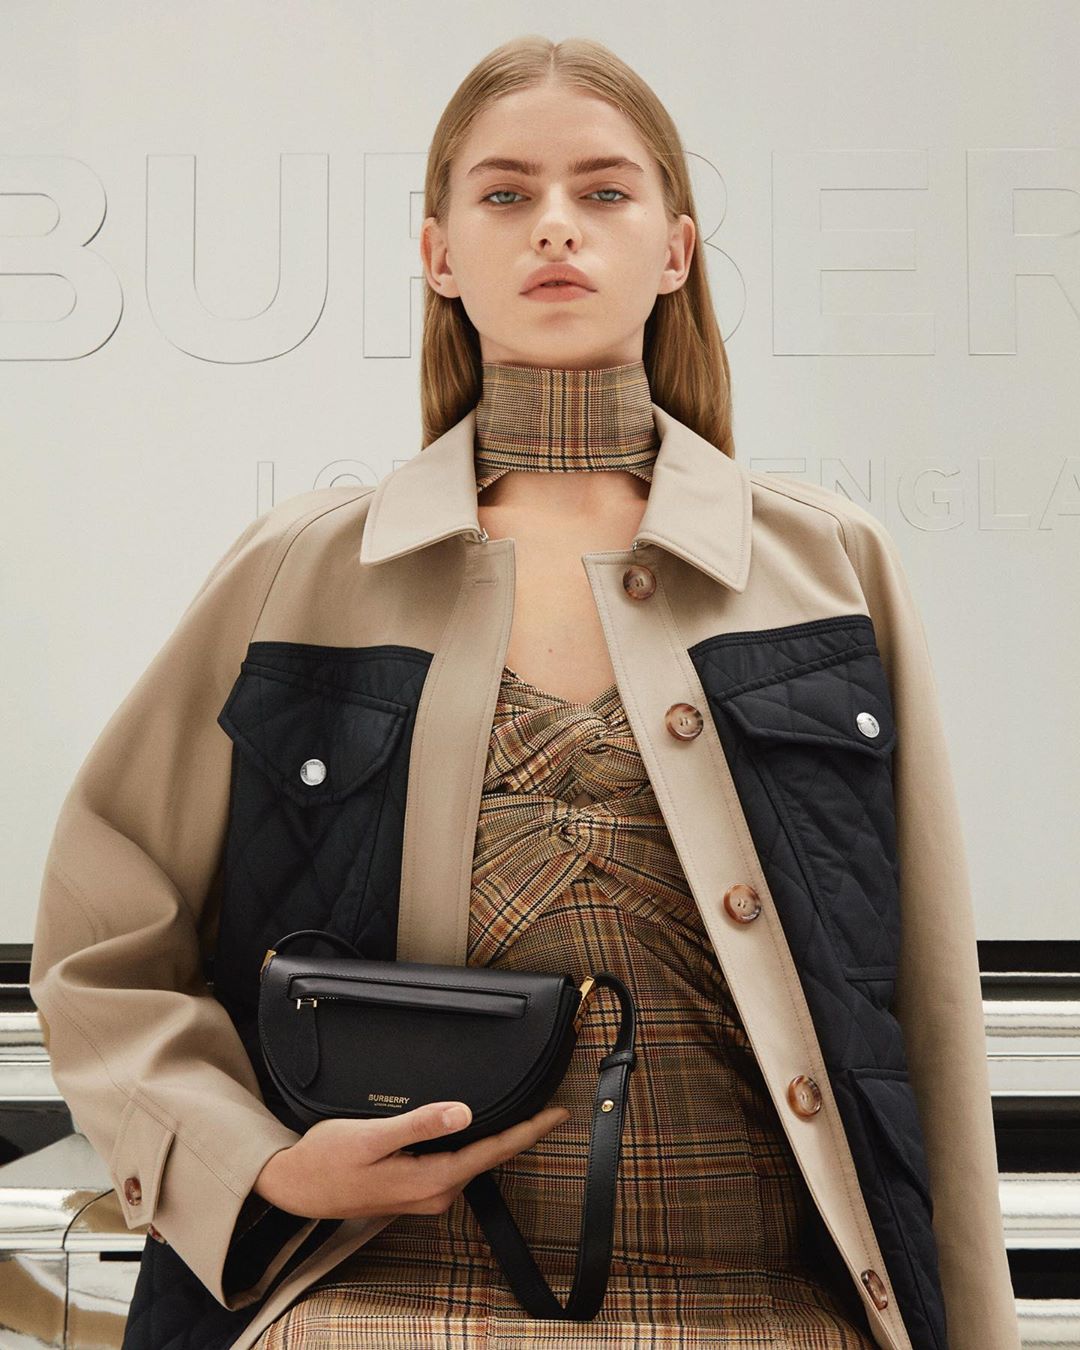 Burberry - First introduced on the #BurberryAutumnWinter20 runway, discover the new Olympia collection using the link in bio
.
#Burberry